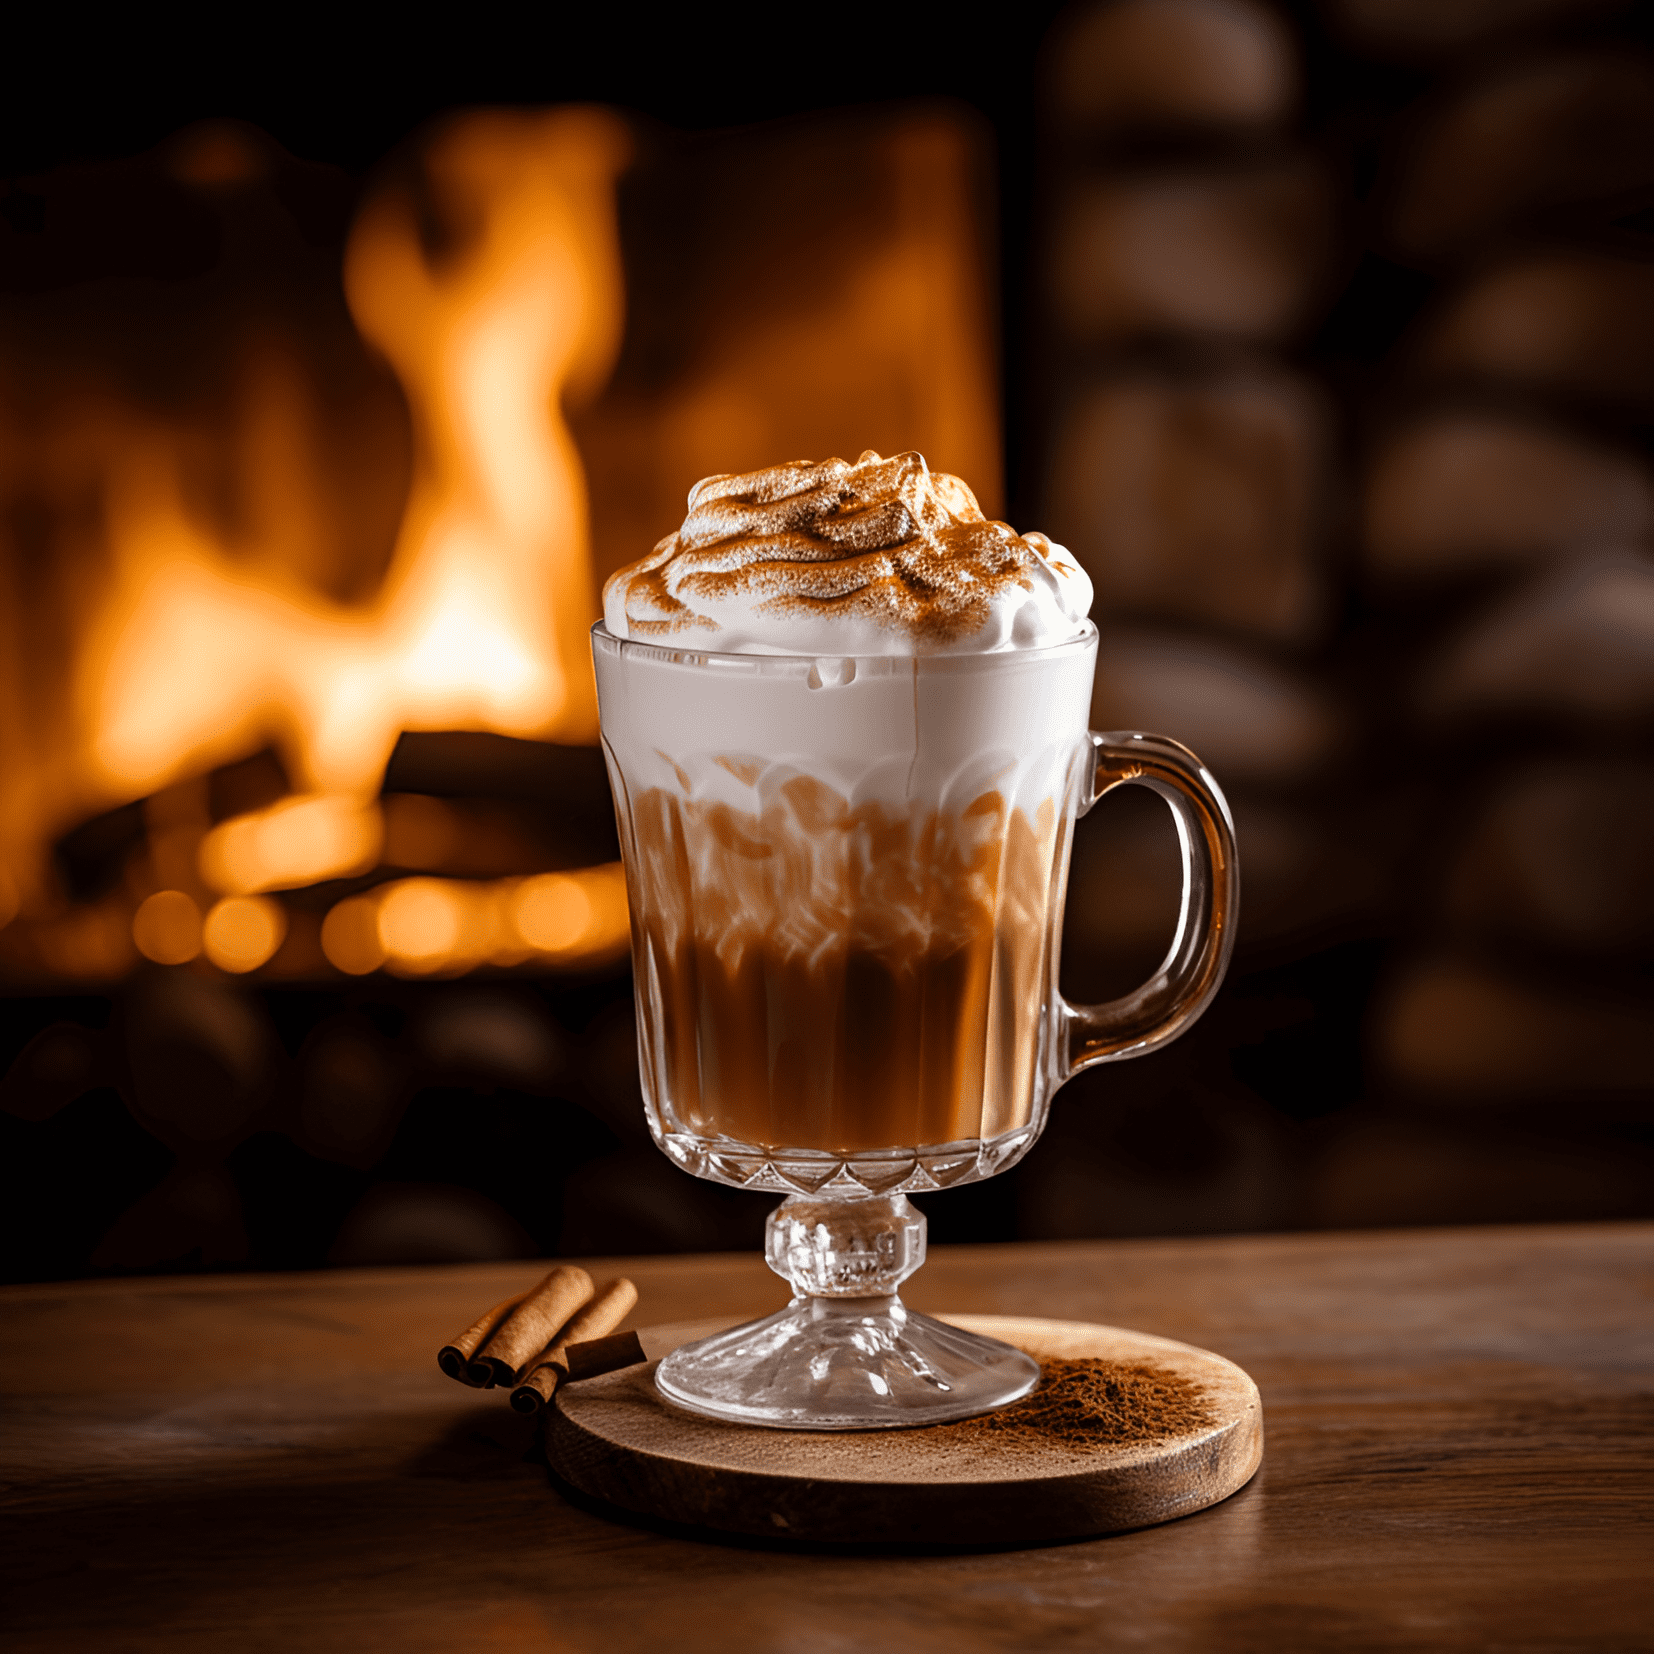 Swedish Coffee Cocktail Recipe - The Swedish Coffee cocktail offers a rich, warm, and slightly sweet flavor profile. The combination of strong coffee, Swedish Punsch, and whipped cream creates a smooth and velvety texture, while the addition of cinnamon and nutmeg adds a hint of spice. The overall taste is well-balanced, with the bitterness of the coffee complementing the sweetness of the liqueur and spices.